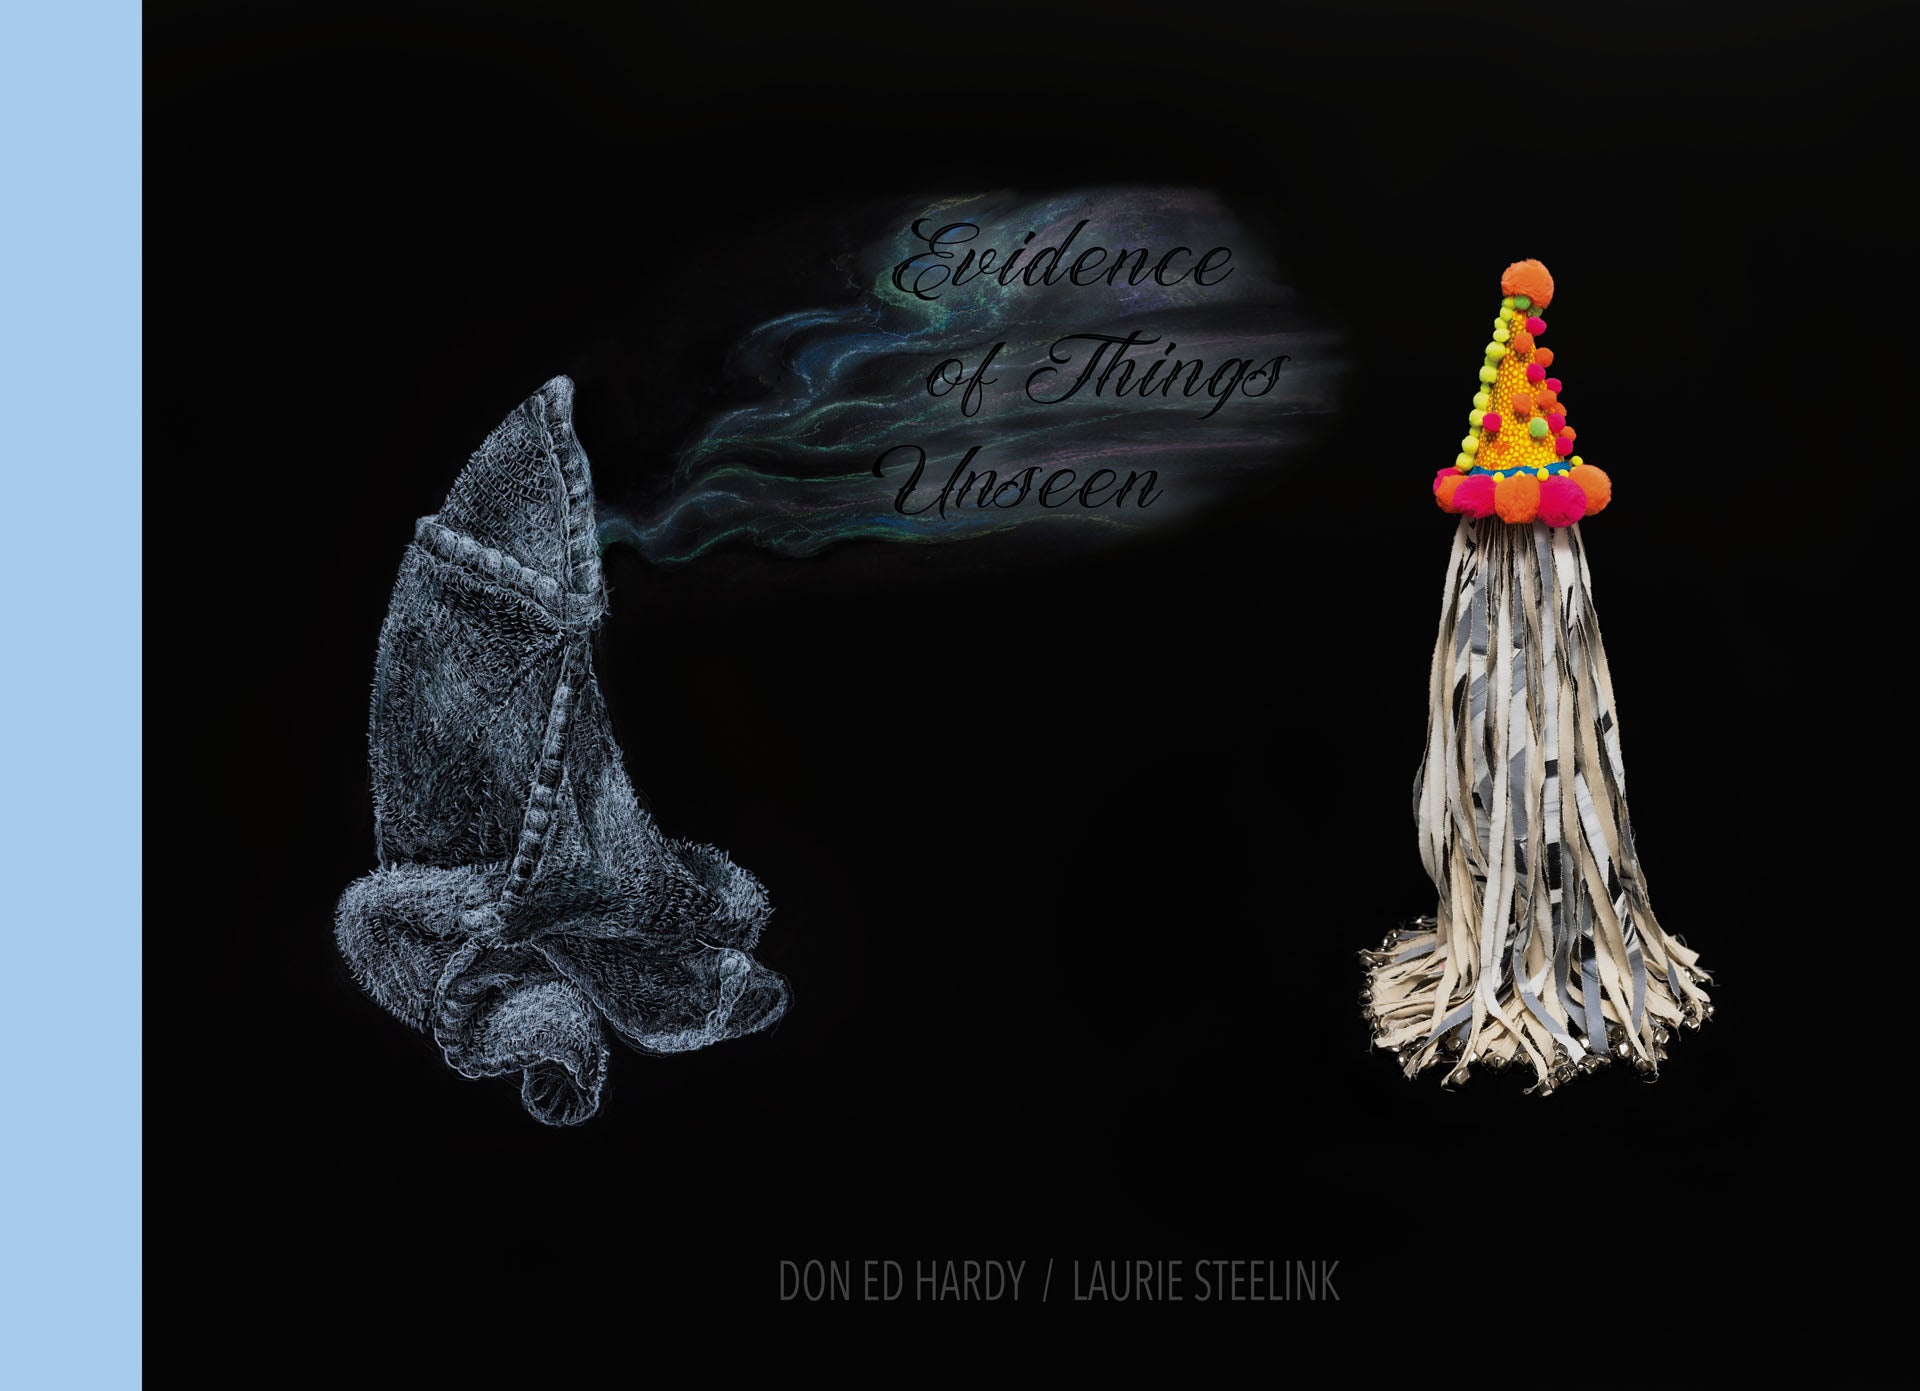 Don Ed Hardy / Laurie Steelink: Evidence of Things Unseen [Catalogue]